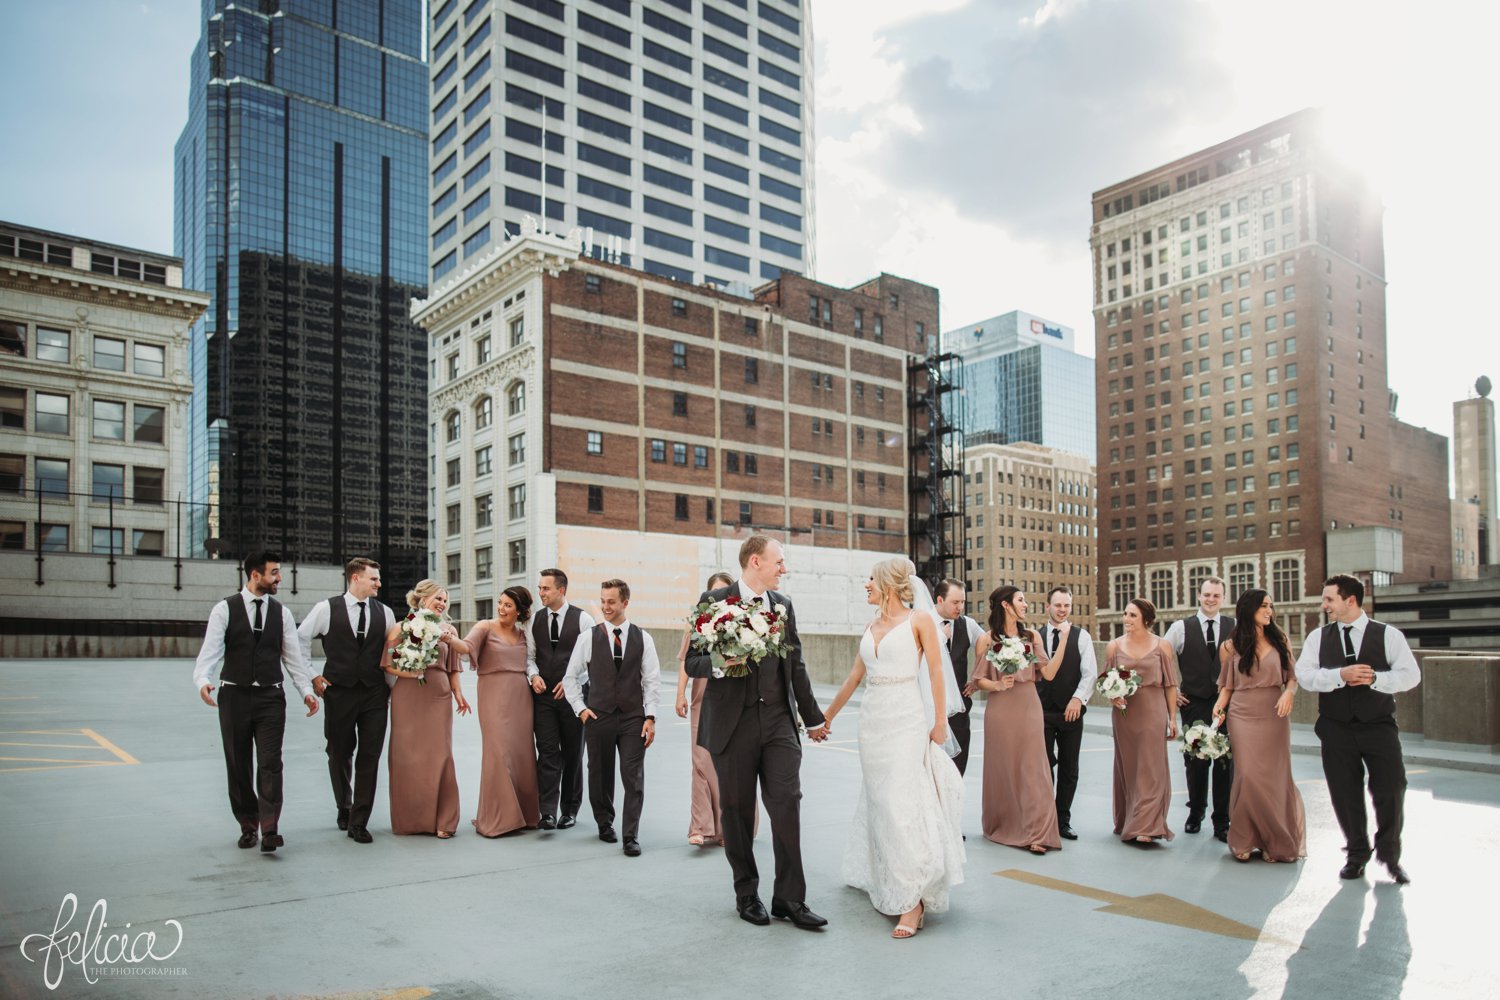 images by feliciathephotographer.com | destination wedding photographer | kansas city | best friends | laughter | natural light | mauve | light pink and red | bella bridesmaids | lace gown | fabulous frocks | full dramatic florals | wild hill | rooftop | urban | groomsmen | grey suit | tip top tux | 